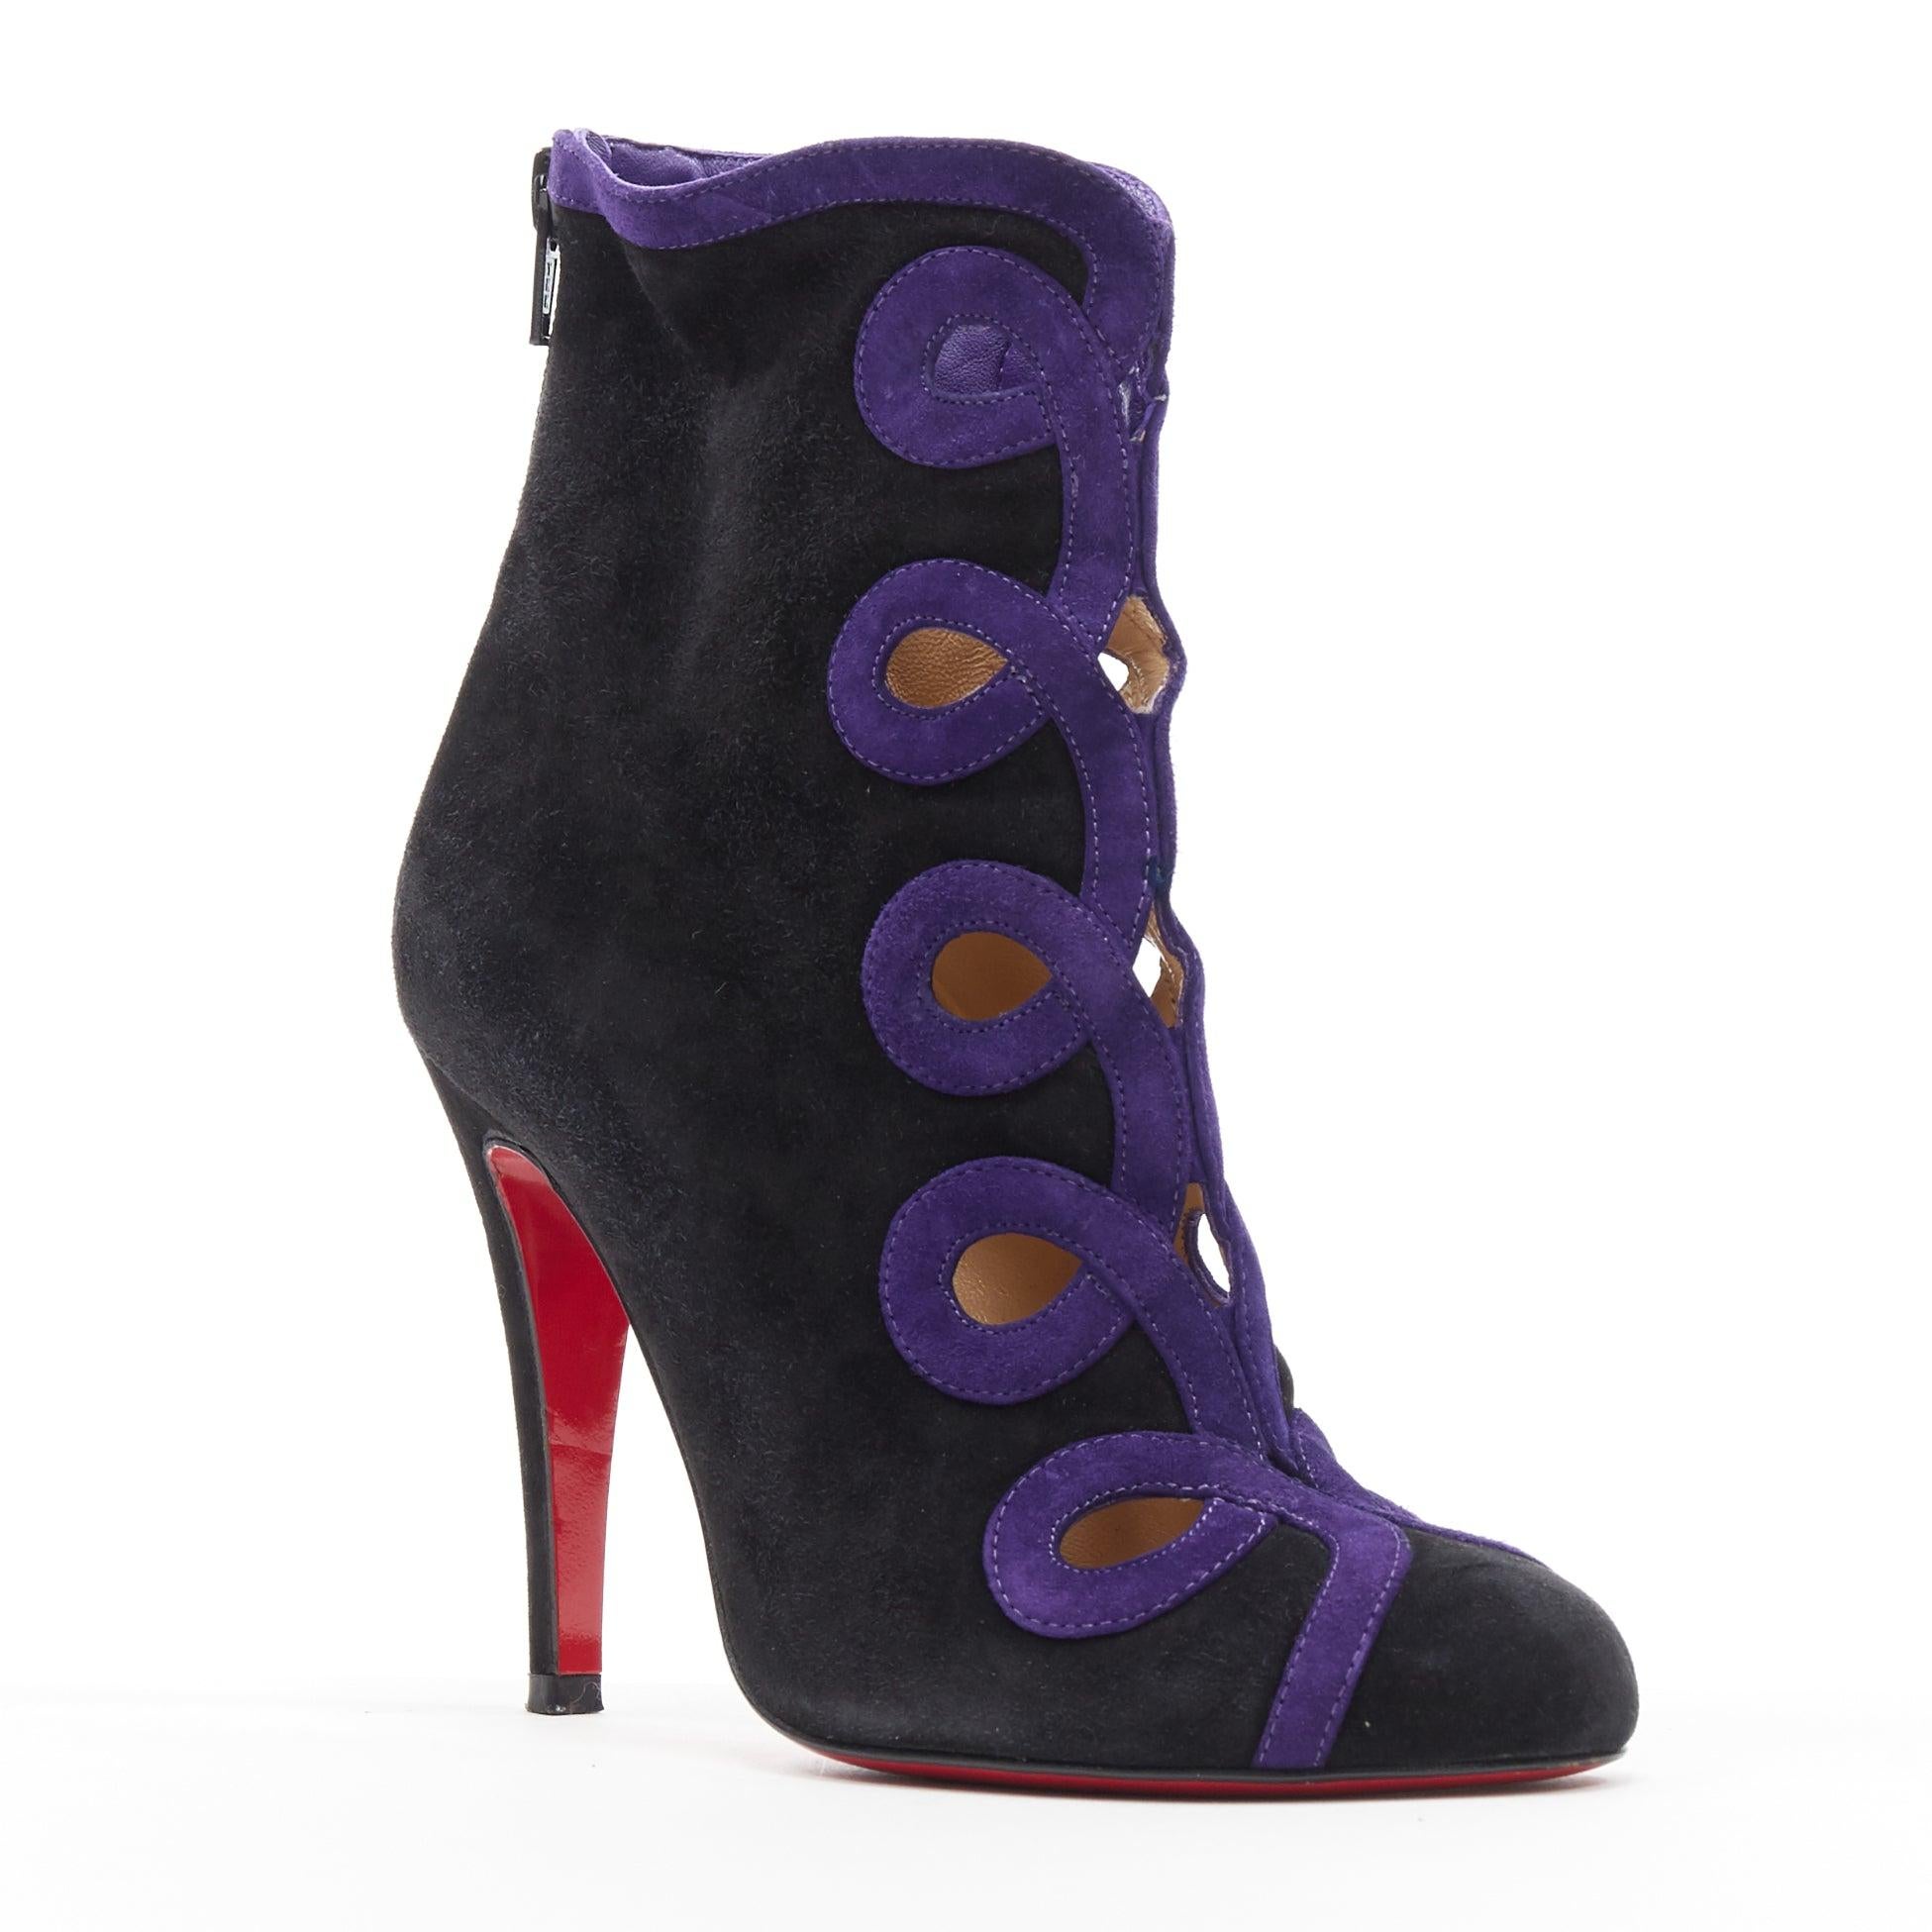 CHRISTIAN LOUBOUTIN black suede purple swirl cut out high heel ankle bootie EU36
Reference: TGAS/A05770
Brand: Christian Louboutin
Material: Suede
Color: Black, Purple
Pattern: Solid
Closure: Zip
Extra Details: Black suede leather upper. Purple